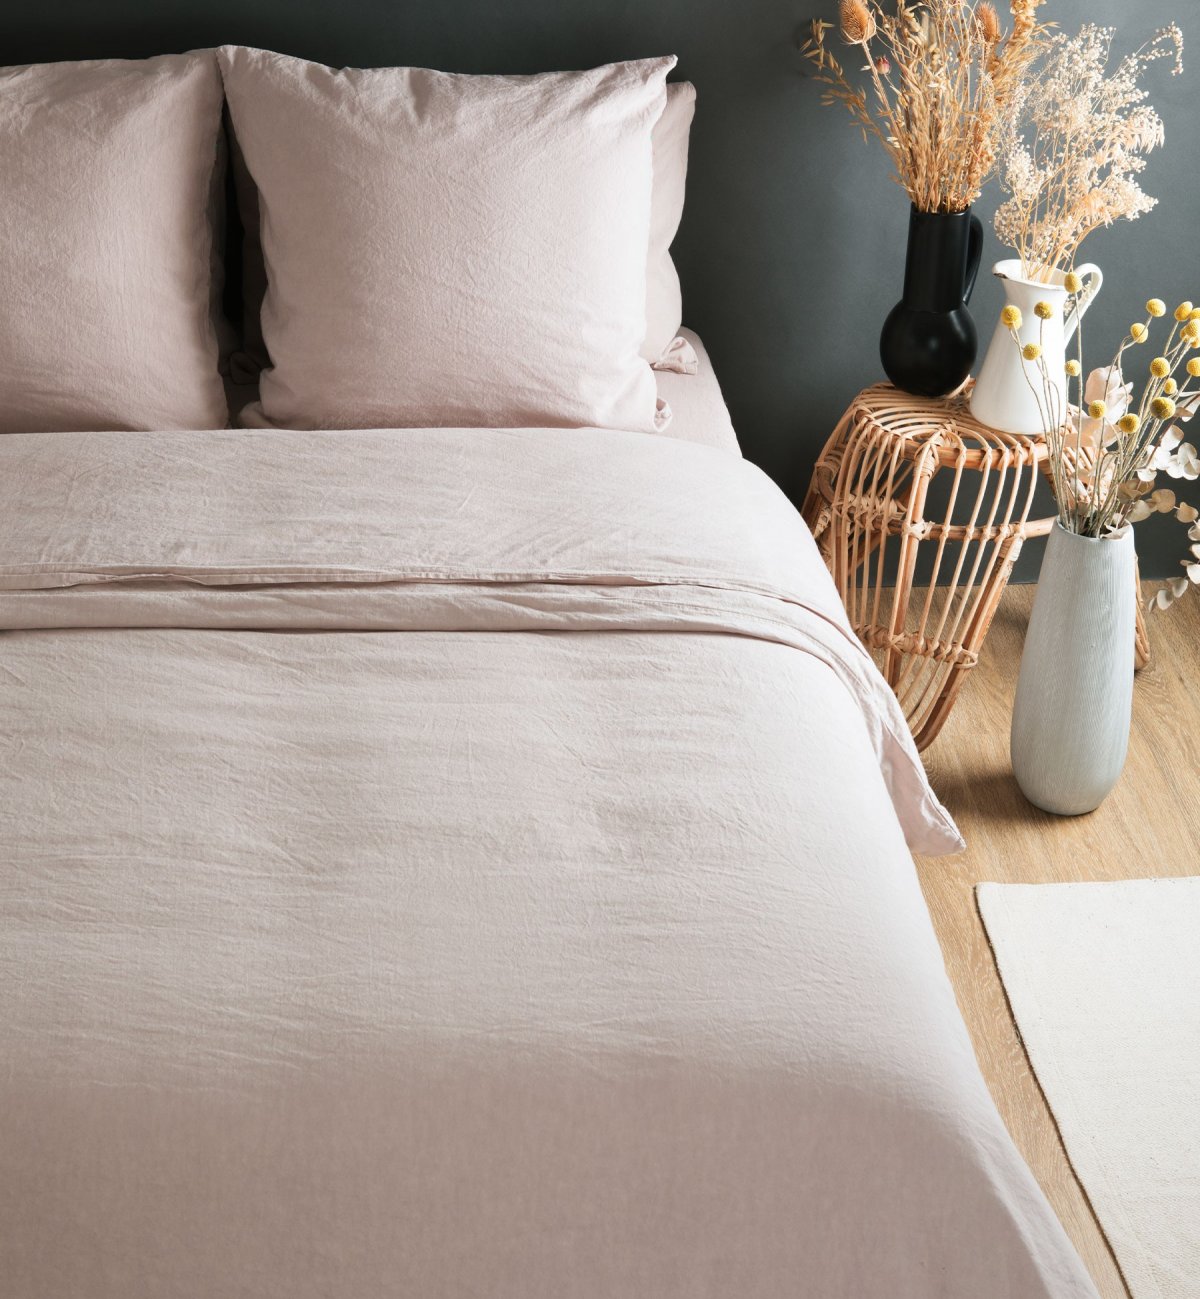 Adult duvet cover in Organic Cotton and linen + Kadolis pillowcases